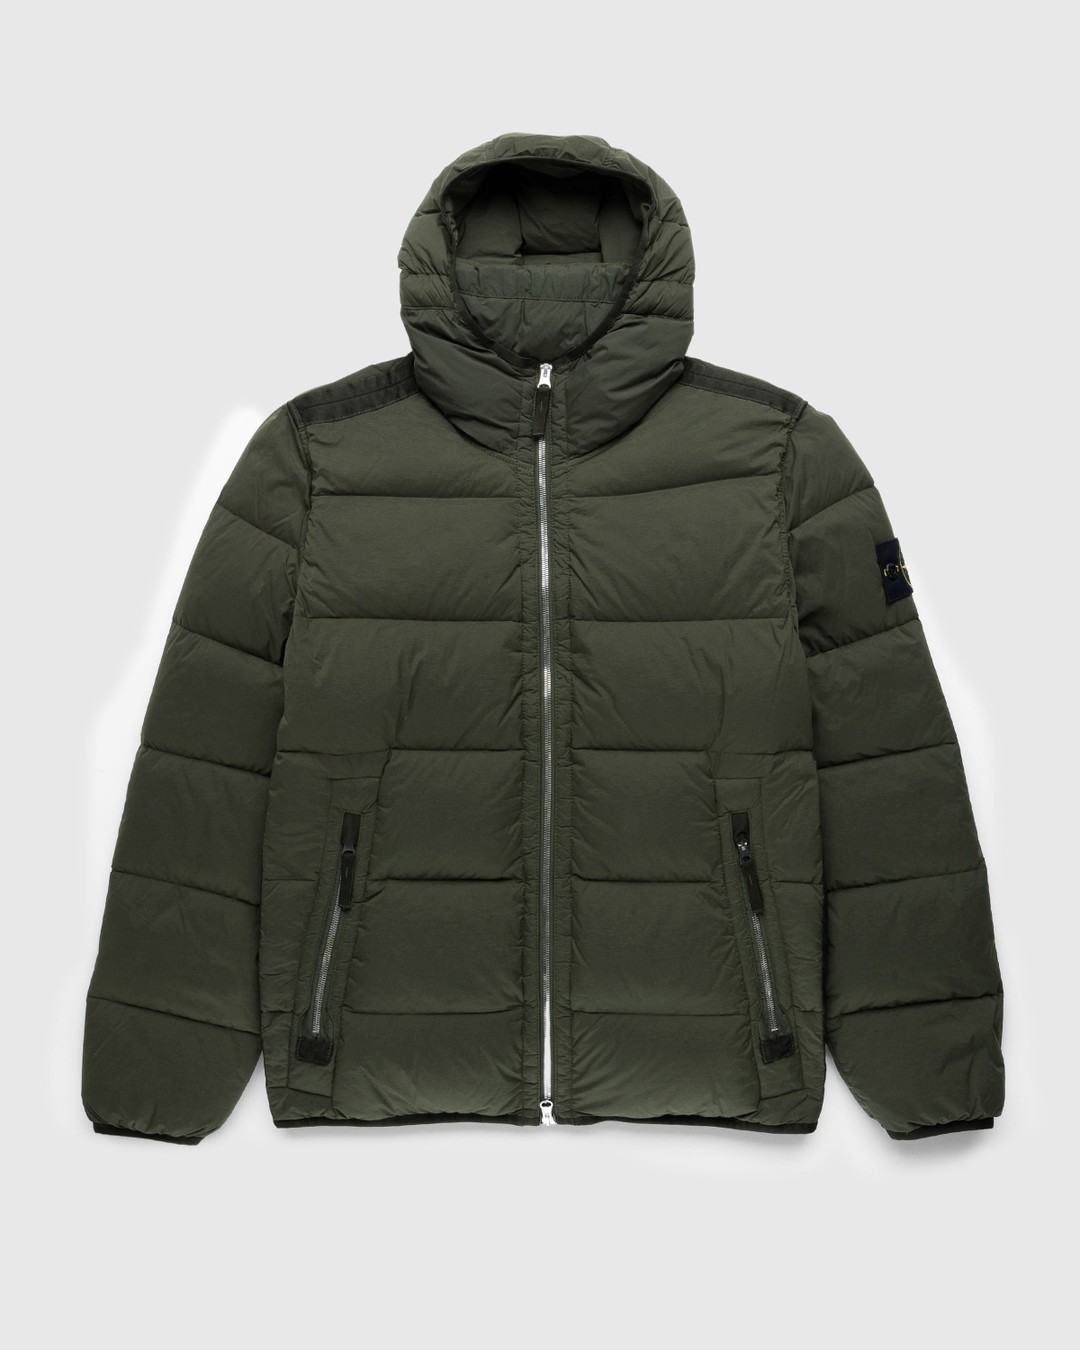 Stone Island – Real Down Jacket Olive - Outerwear - Green - Image 1